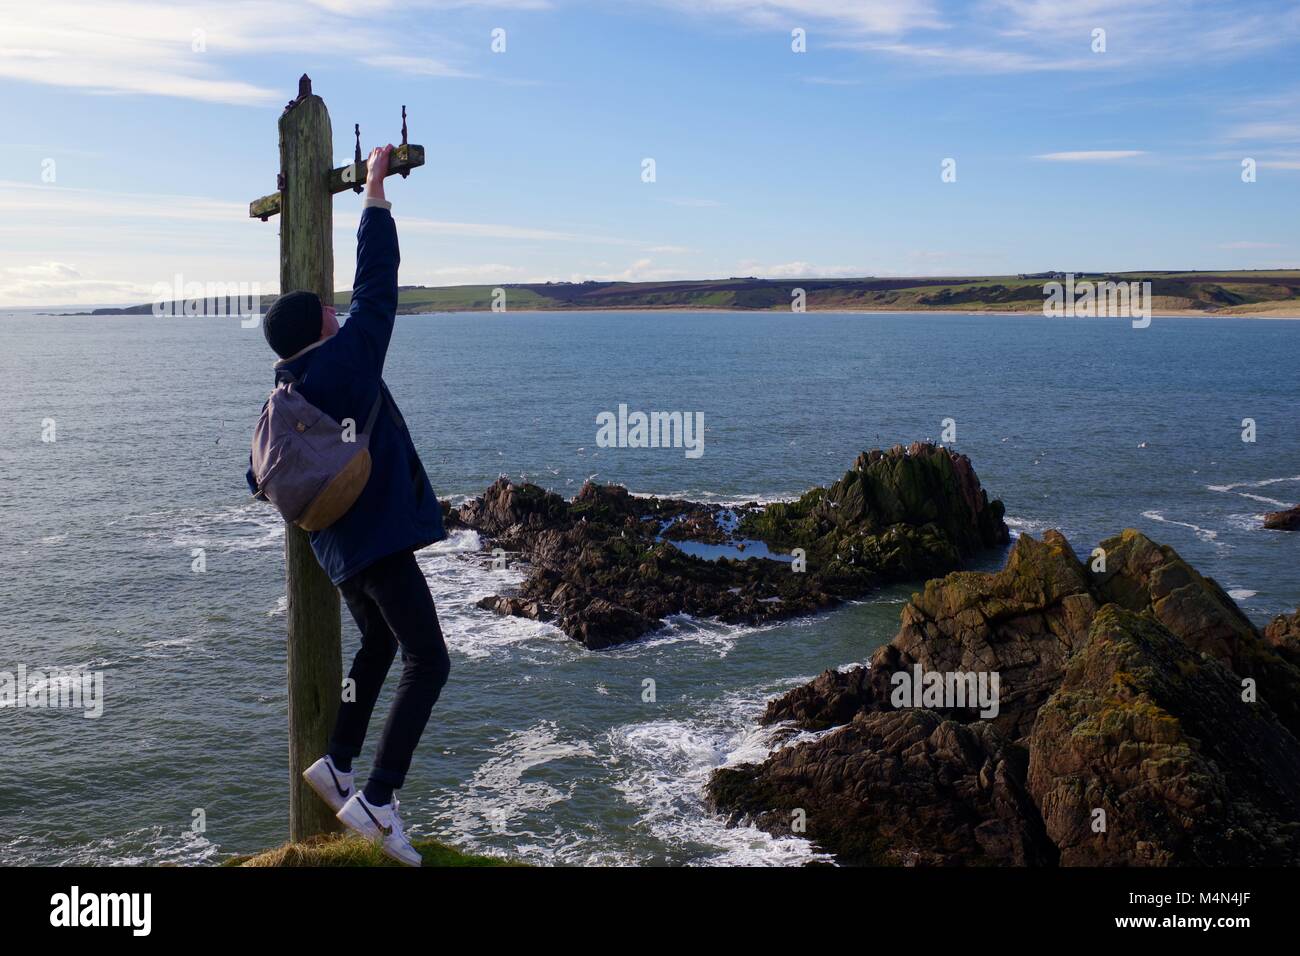 Young Adventurous Man Dangles from an Old Telegraph Pole at the Edge of a Liff. Cruden Bay, Aberdeenshire, Scotland, UK. Feb, 2018. Stock Photo